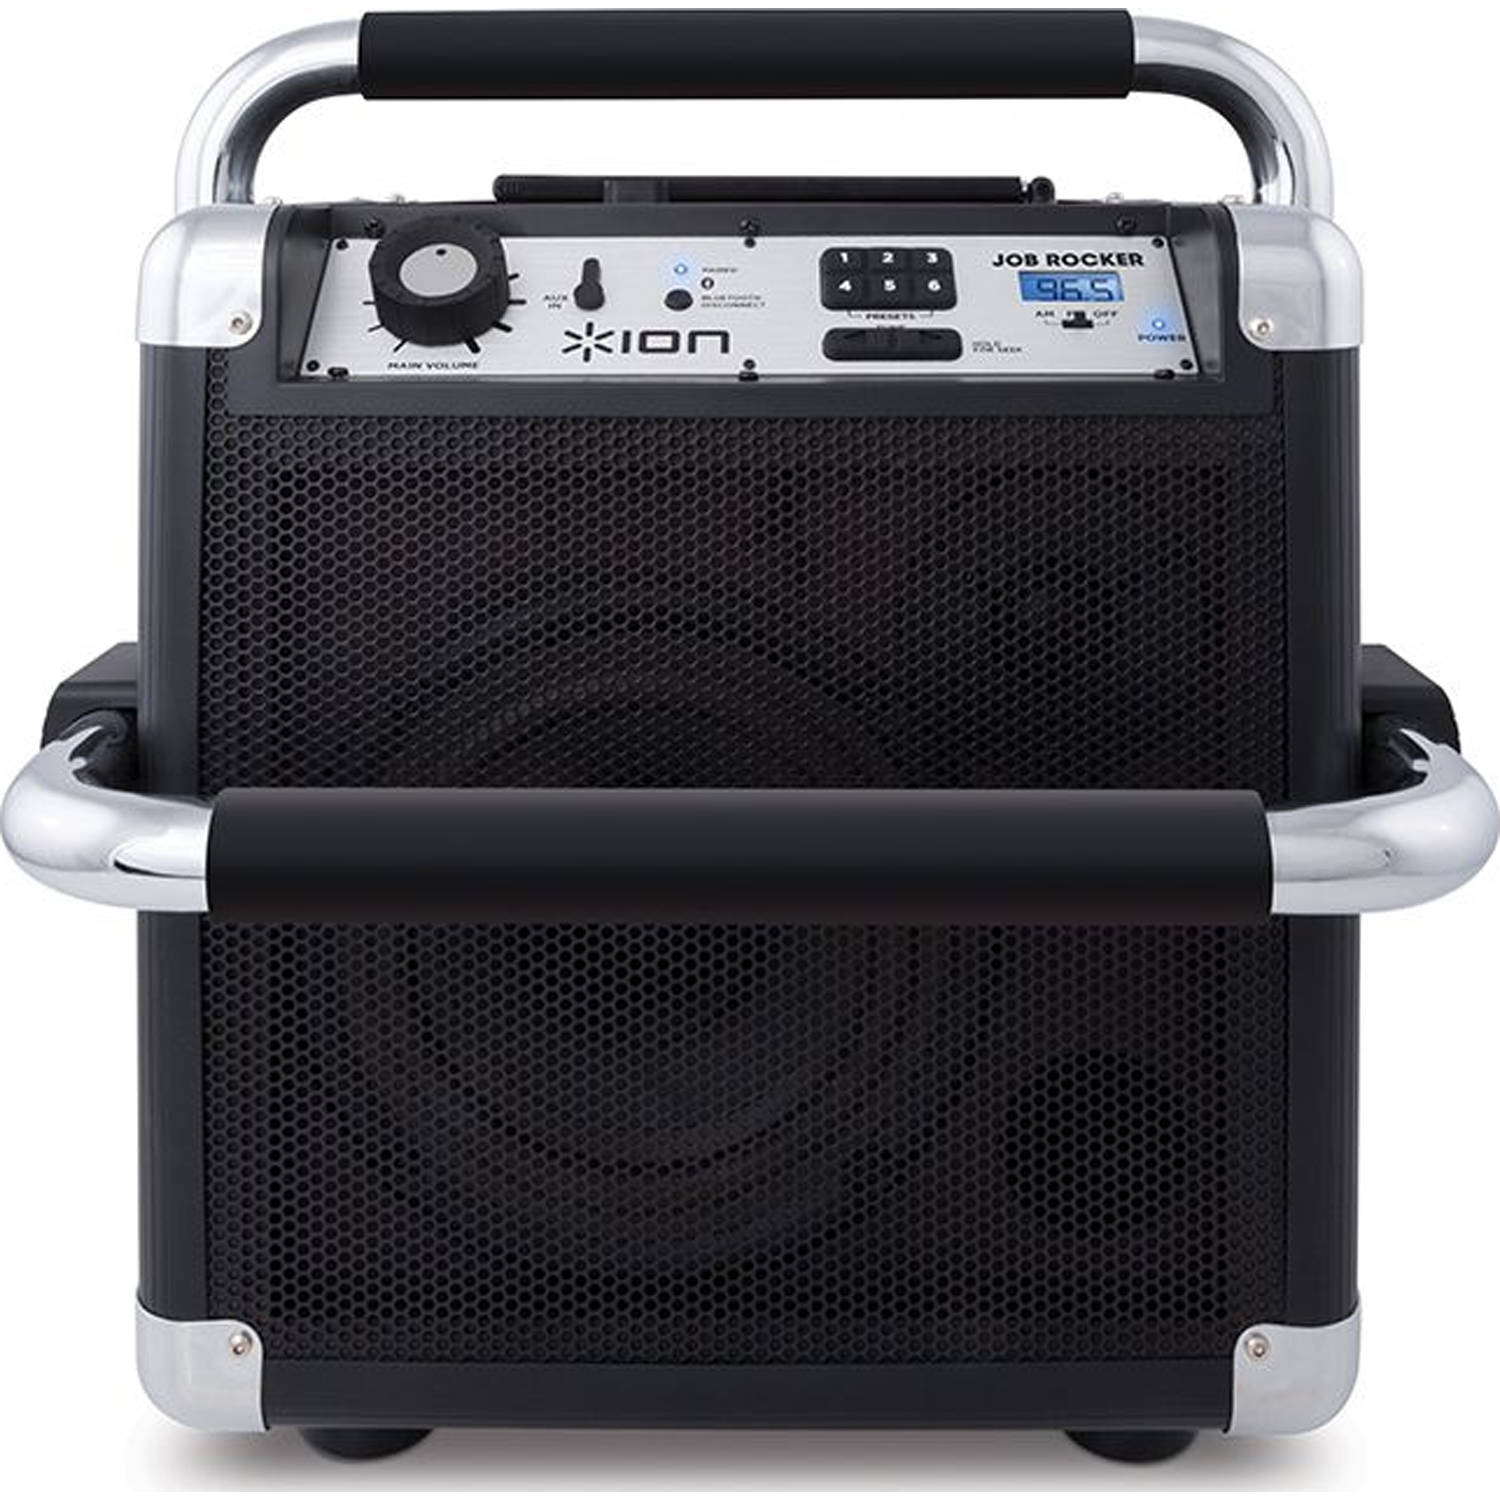 ION AUDIO Job Rocker Bluetooth All-Weather Portable PA System OPEN BOX